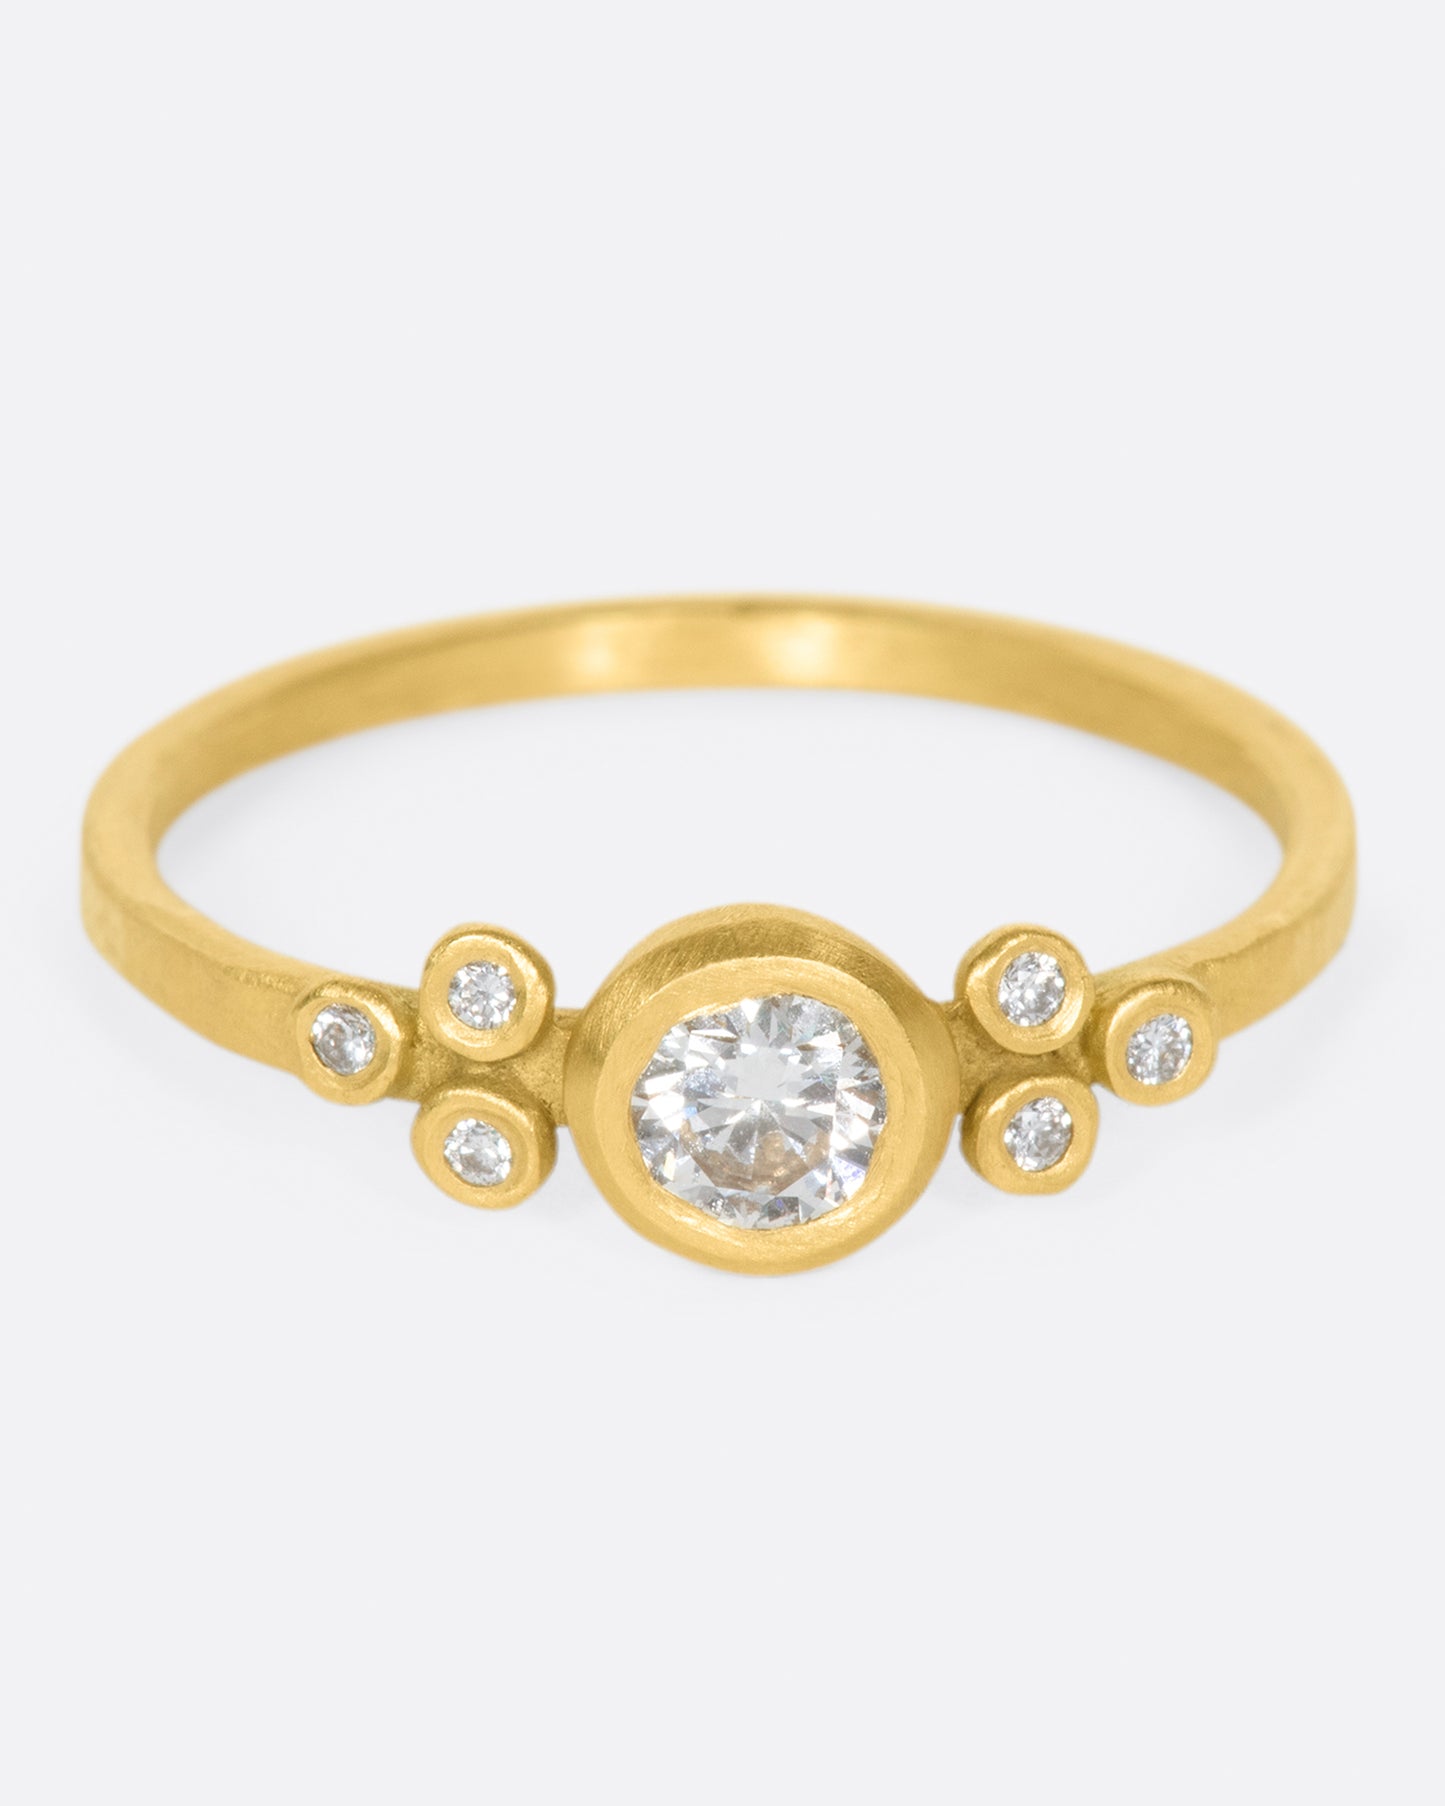 A hammered gold band with a round bezel set diamond at its center, flanked by three smaller round diamonds on either side.